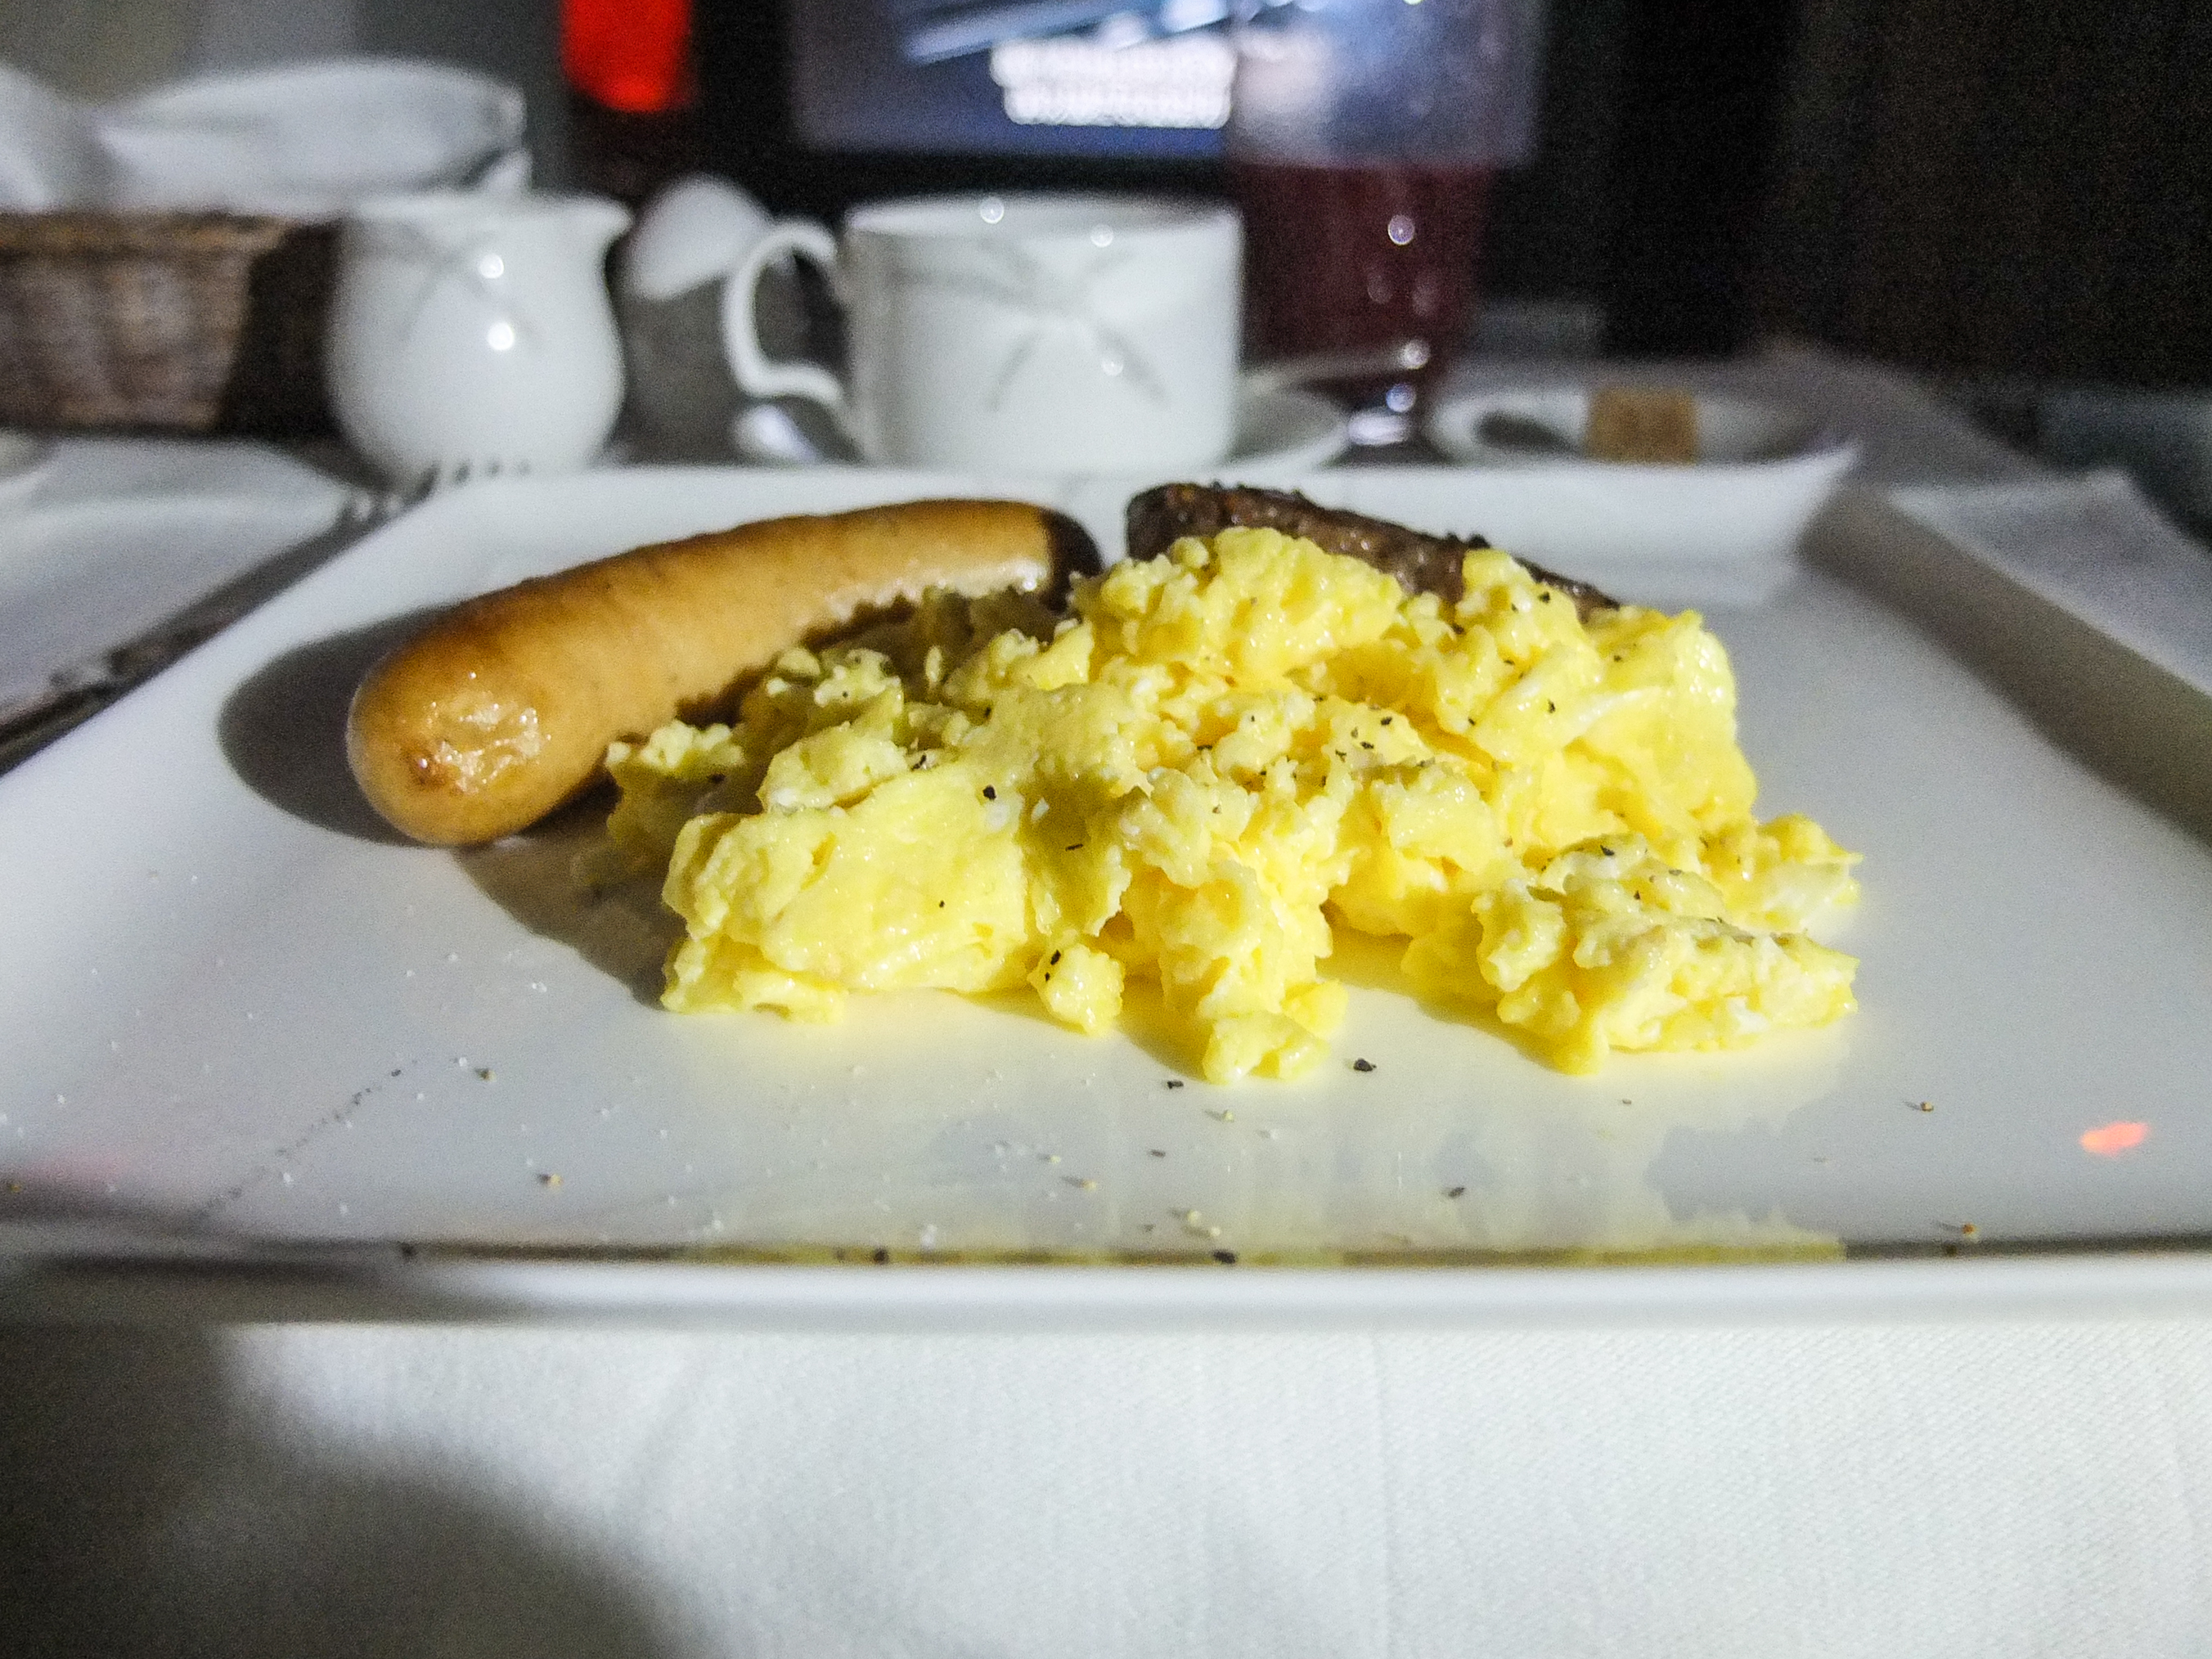 Scrambled eggs and suspicious looking sausage